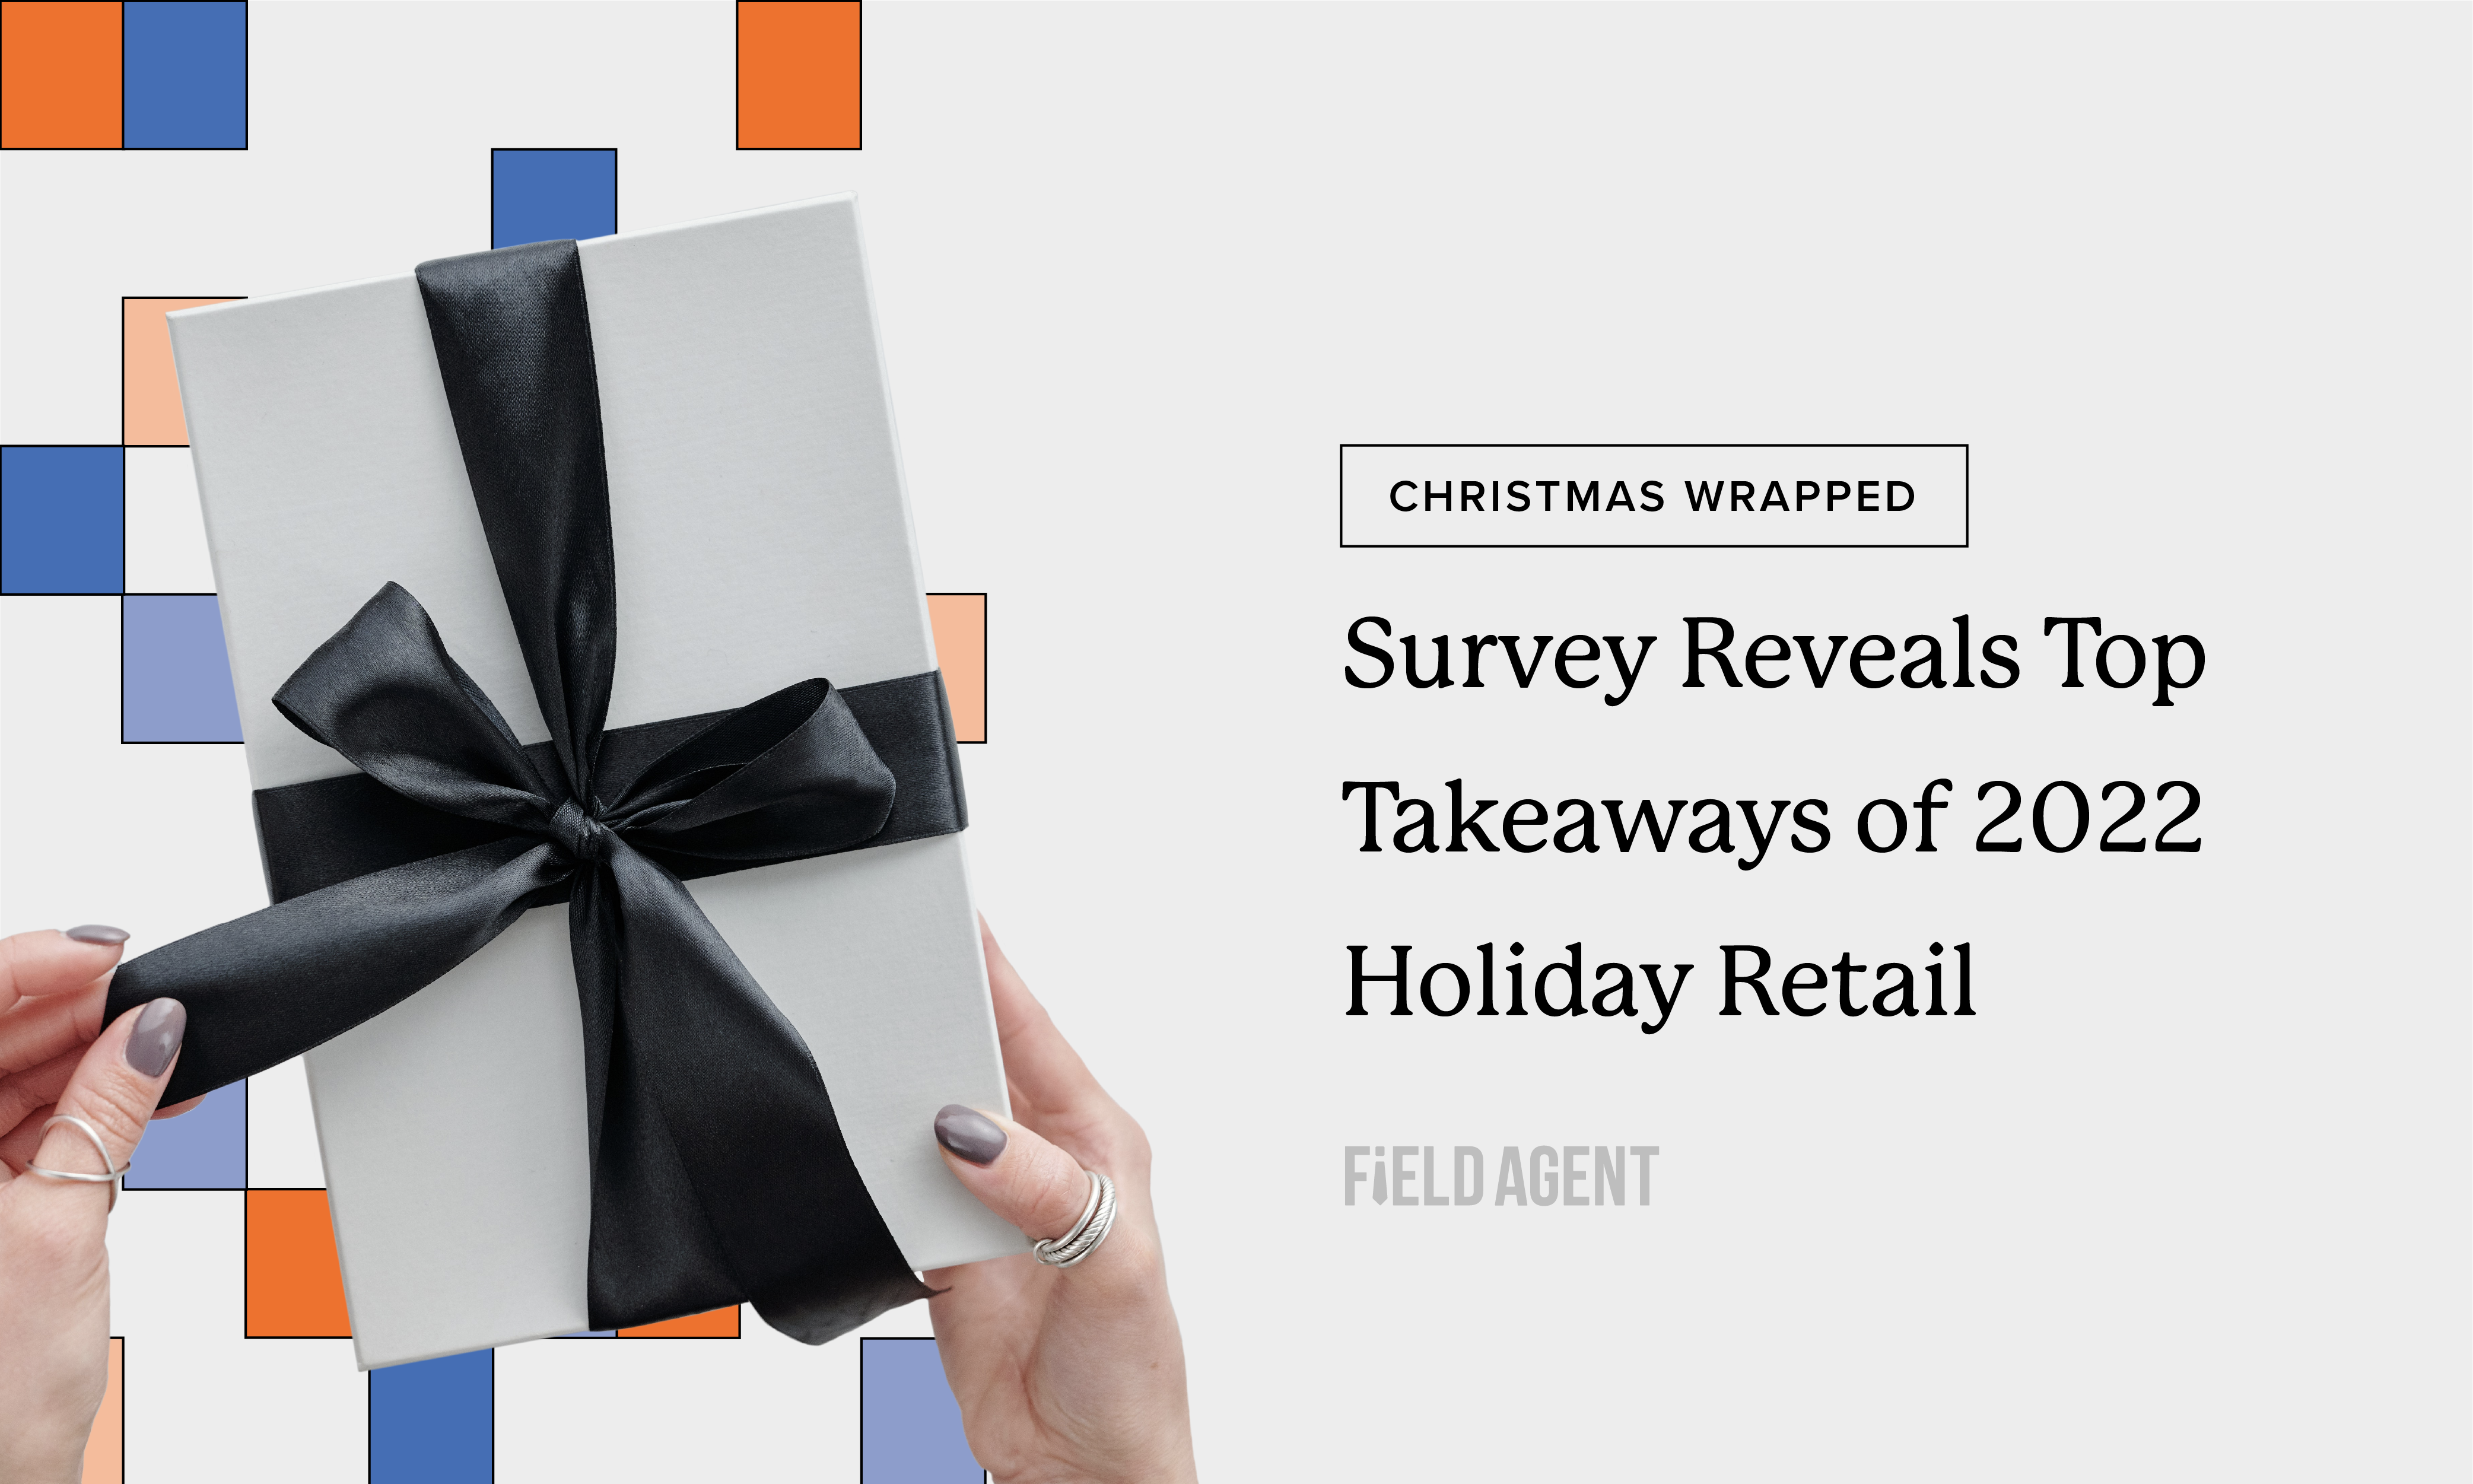 Christmas Wrapped: Survey Reveals Top Takeaways of 2022 Holiday Retail